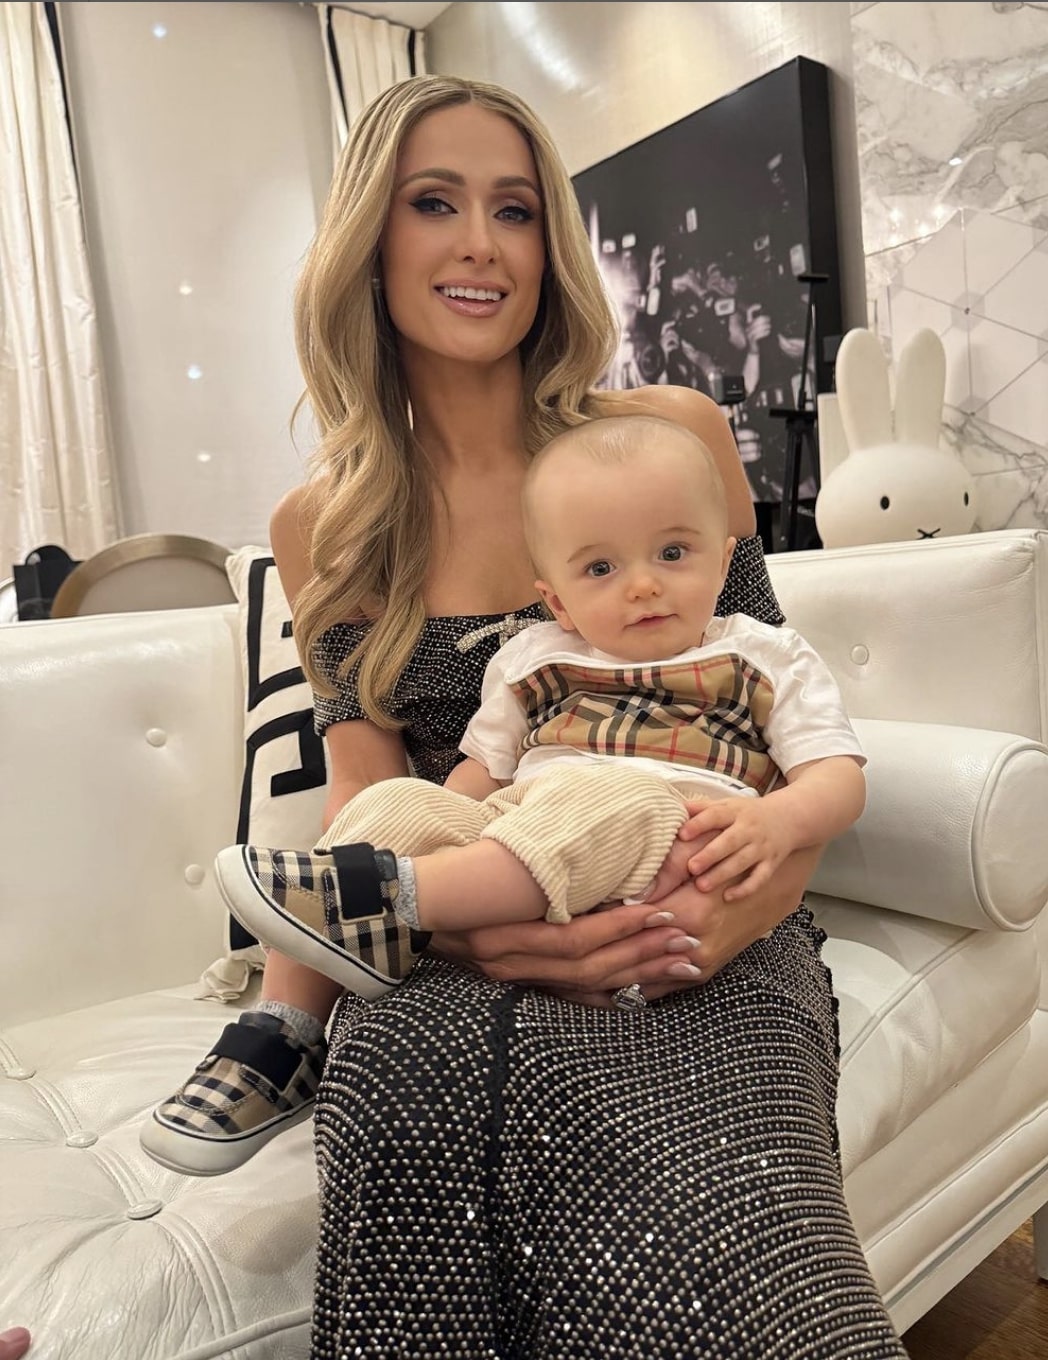 paris-hilton-joked-about-not-changing-son’s-diaper-for-first-month-of-his-life